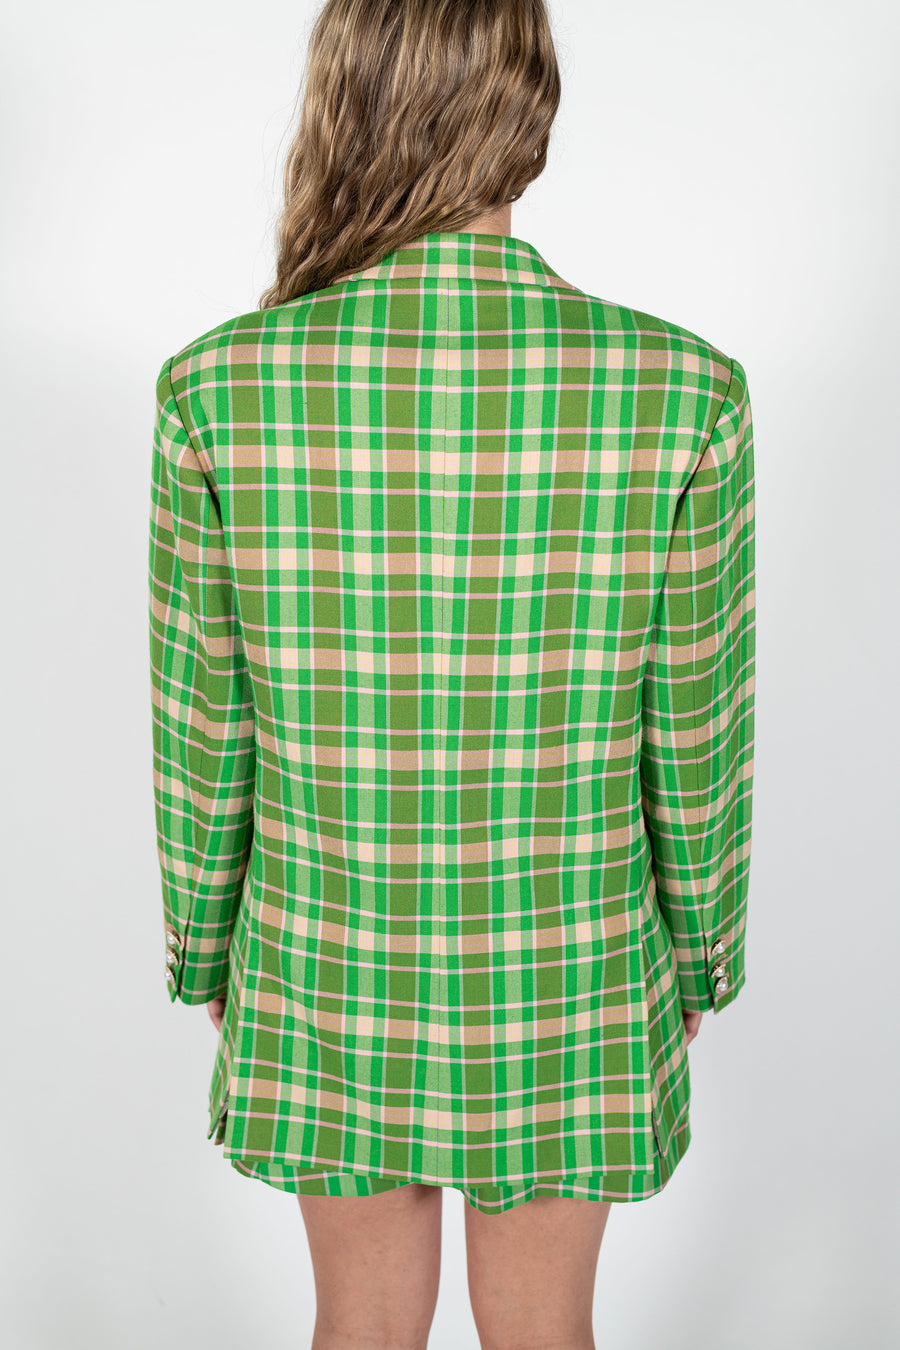 Back view of the Verdant Tailored Jacket in Apple Green by House of Campbell. 